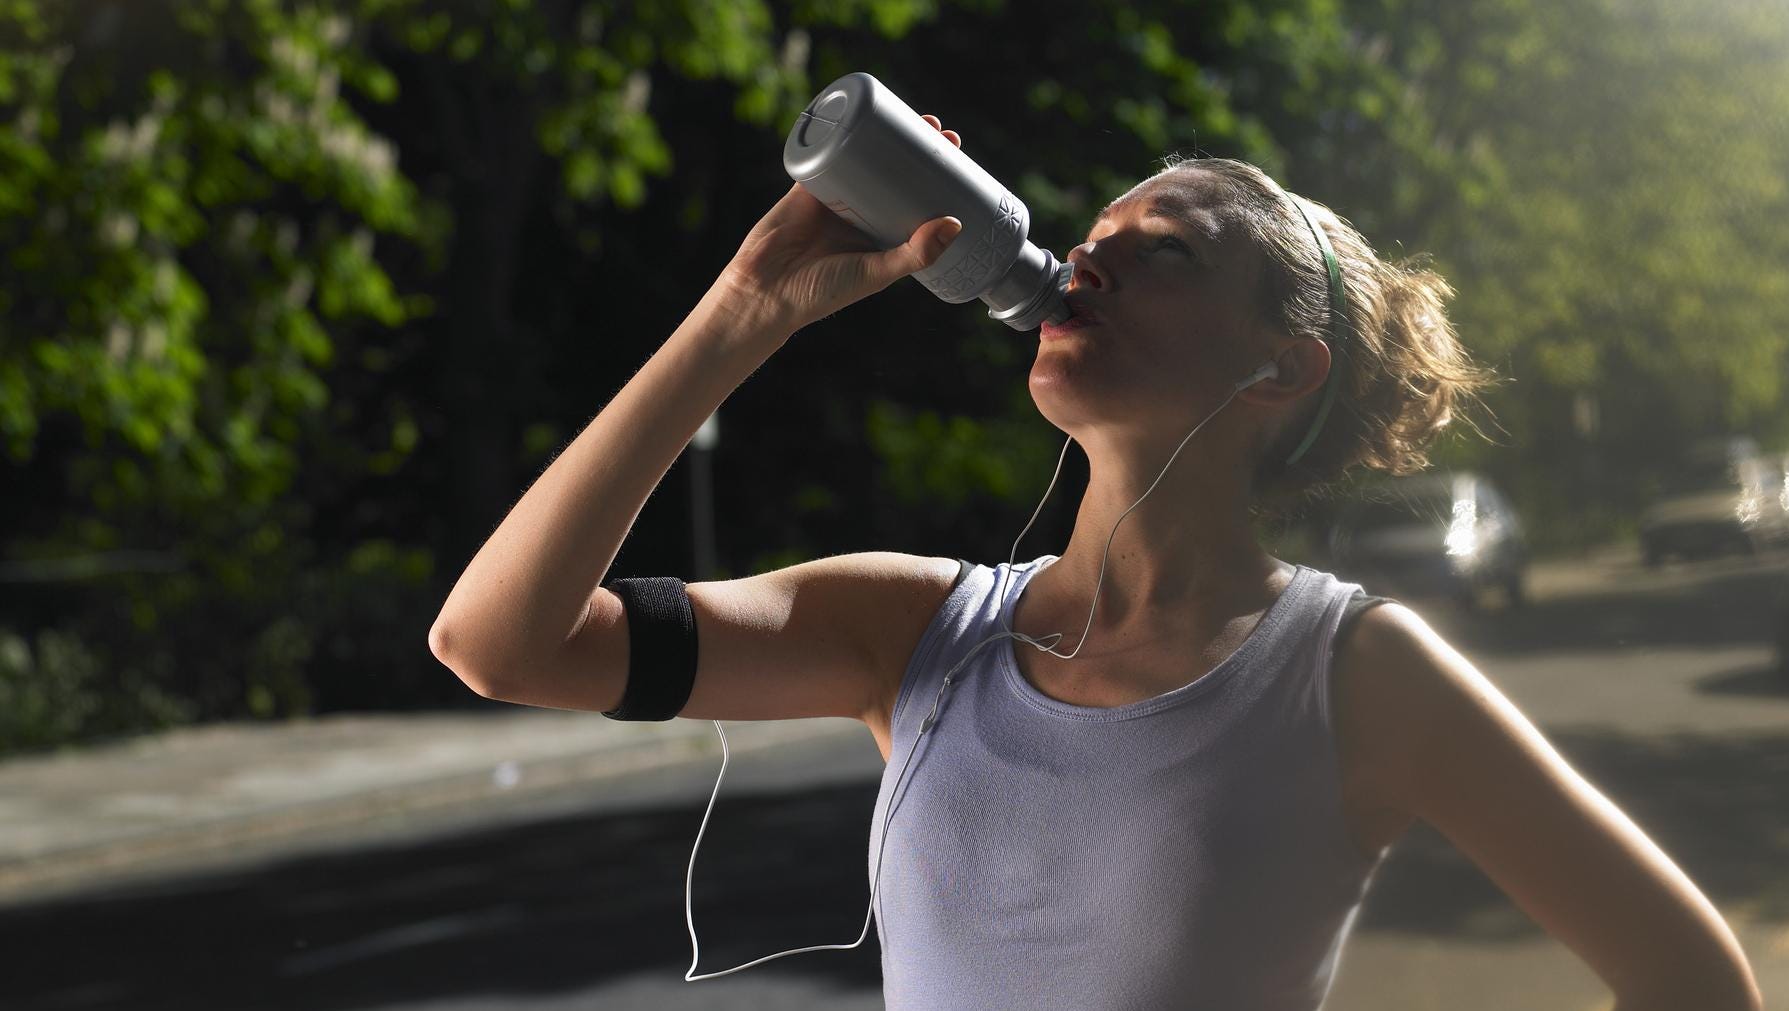 Hydration is key for active people during crushing summer heat - Florida Today